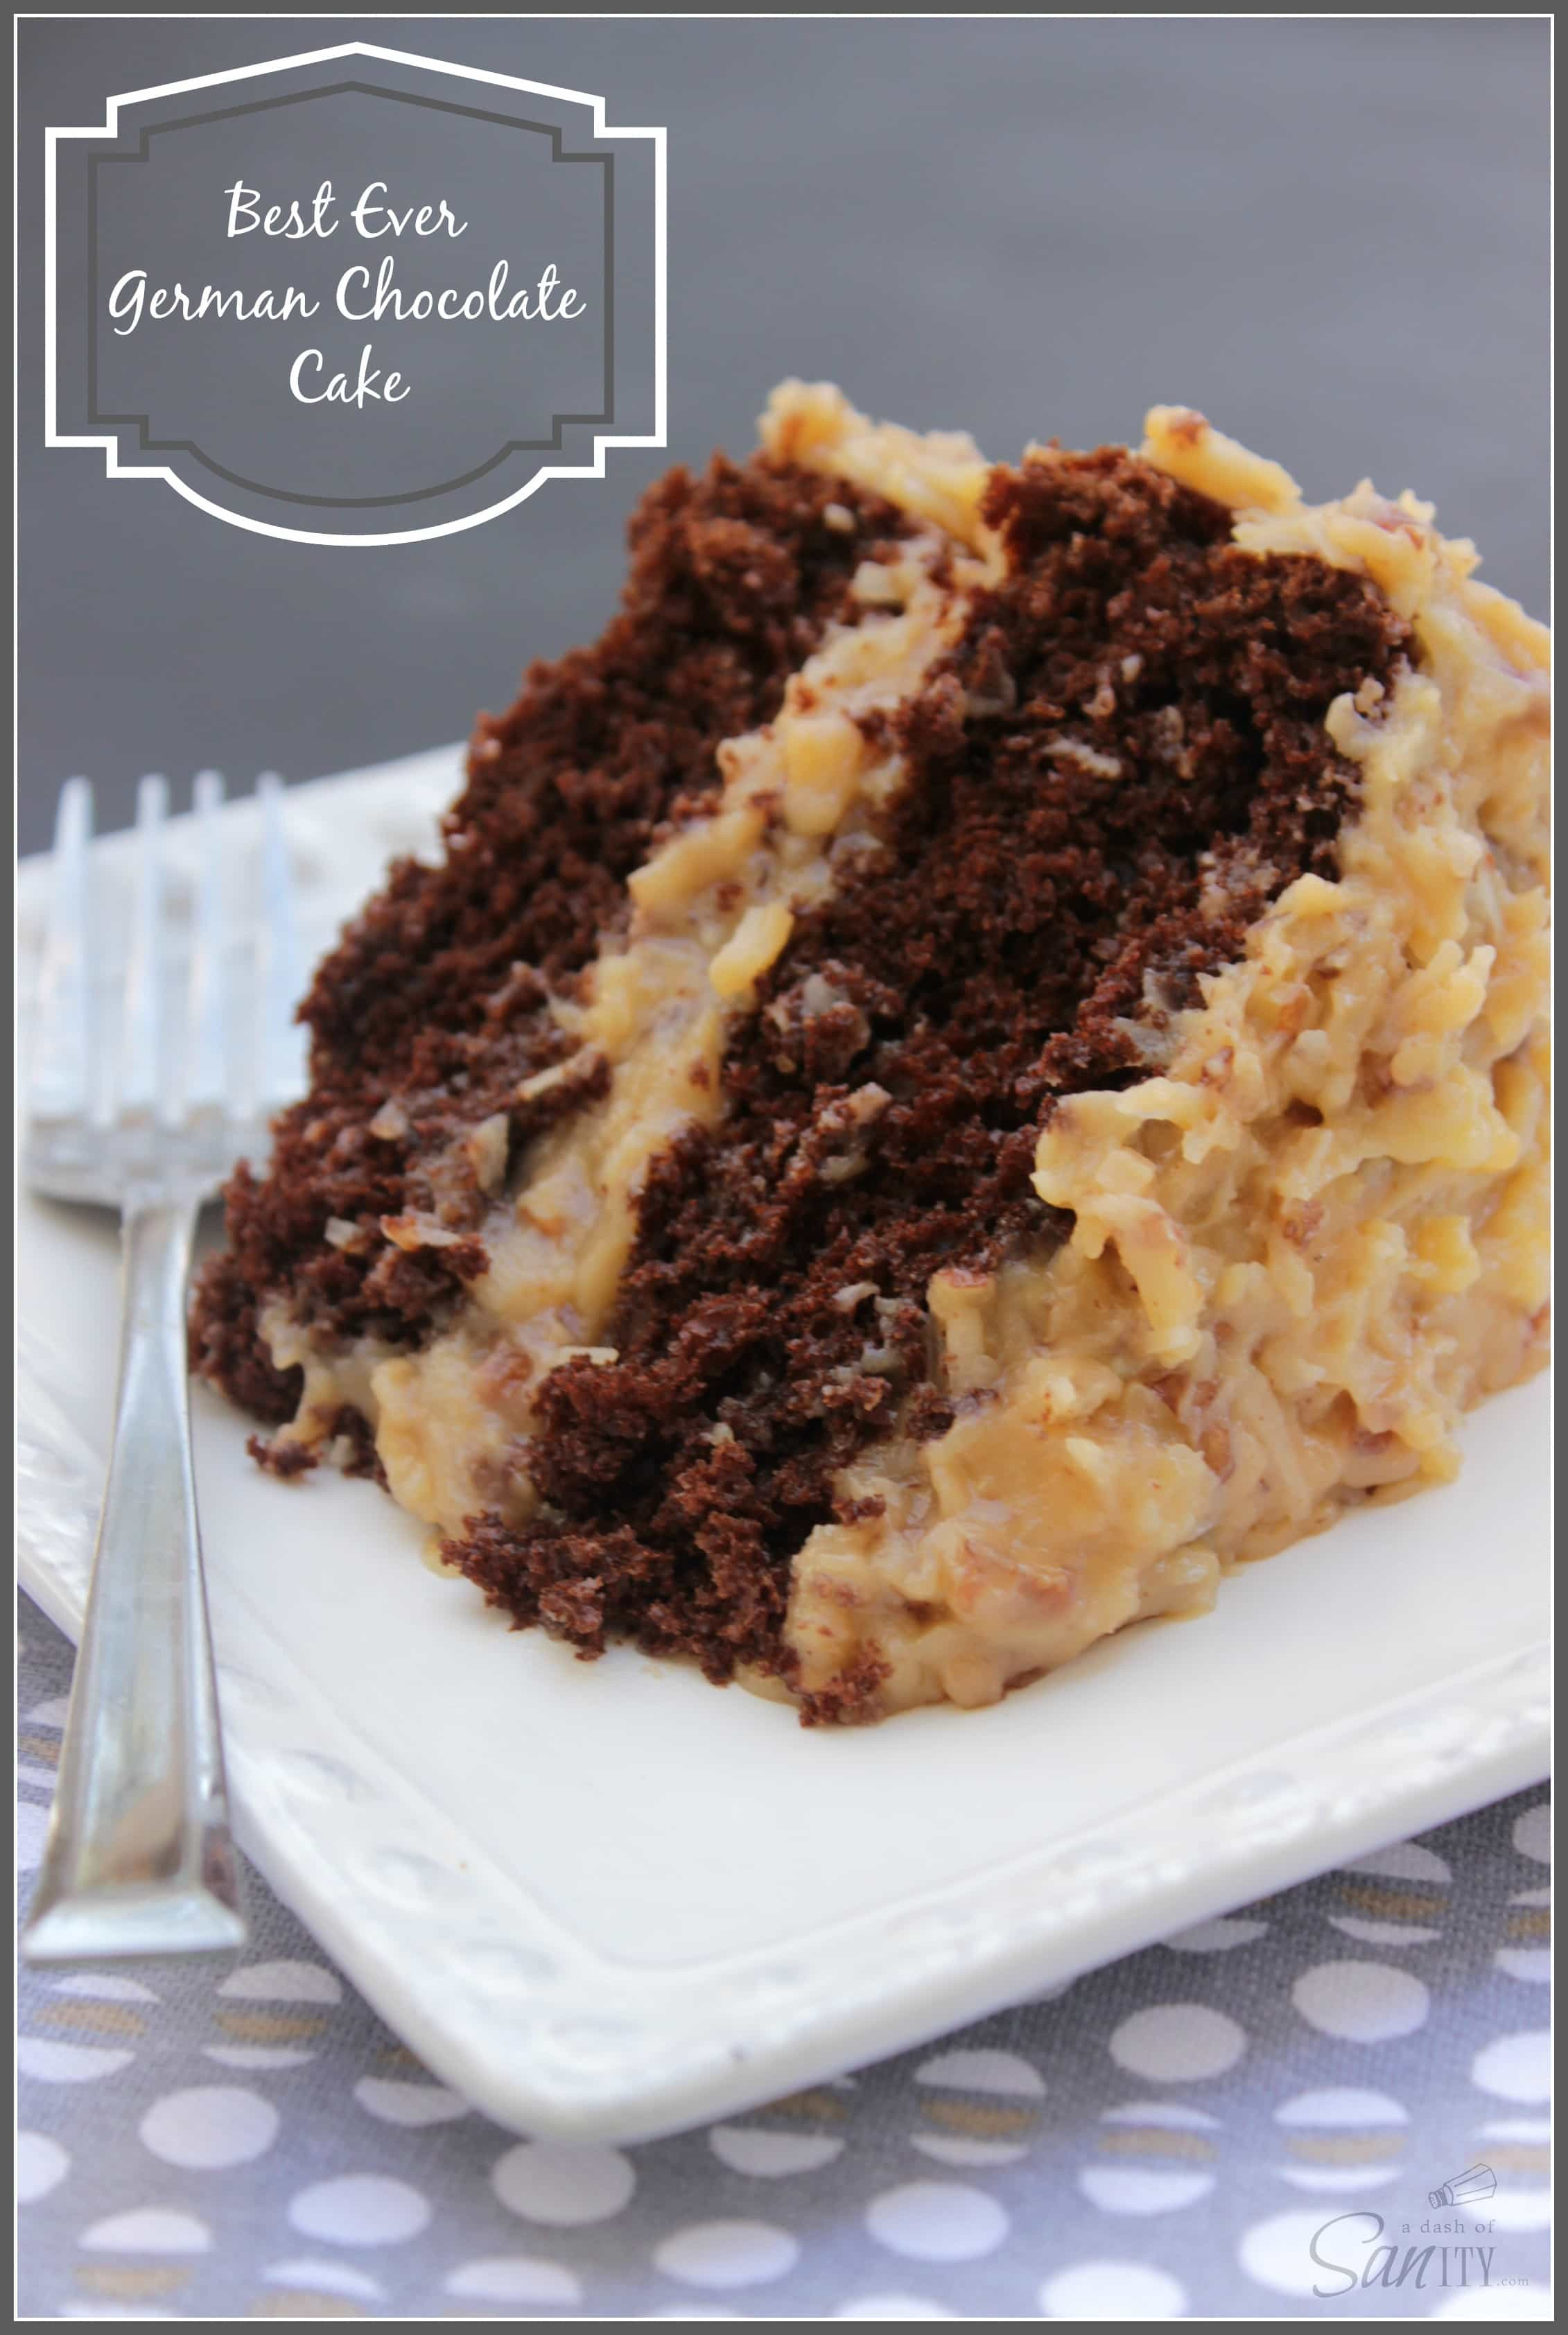 German Chocolate Cake Recipes
 21 Incredible Cake Recipes and Decorating Ideas